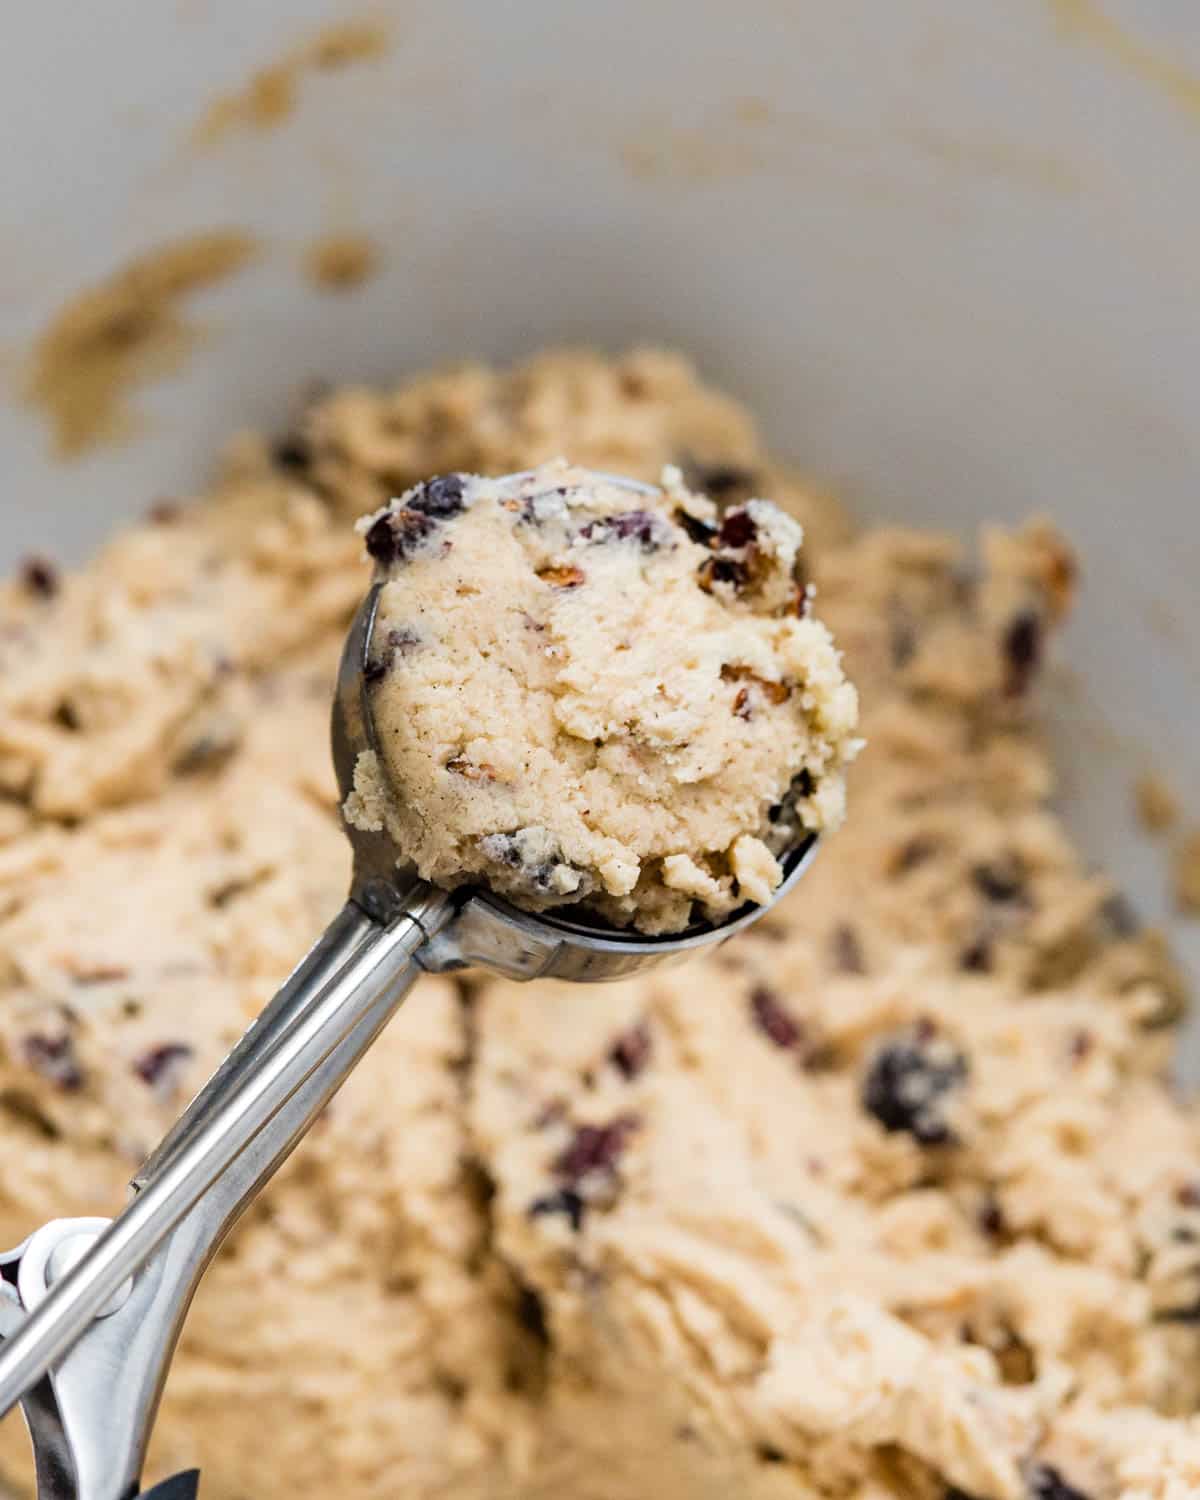 I am using a scoop to portion cookie dough.